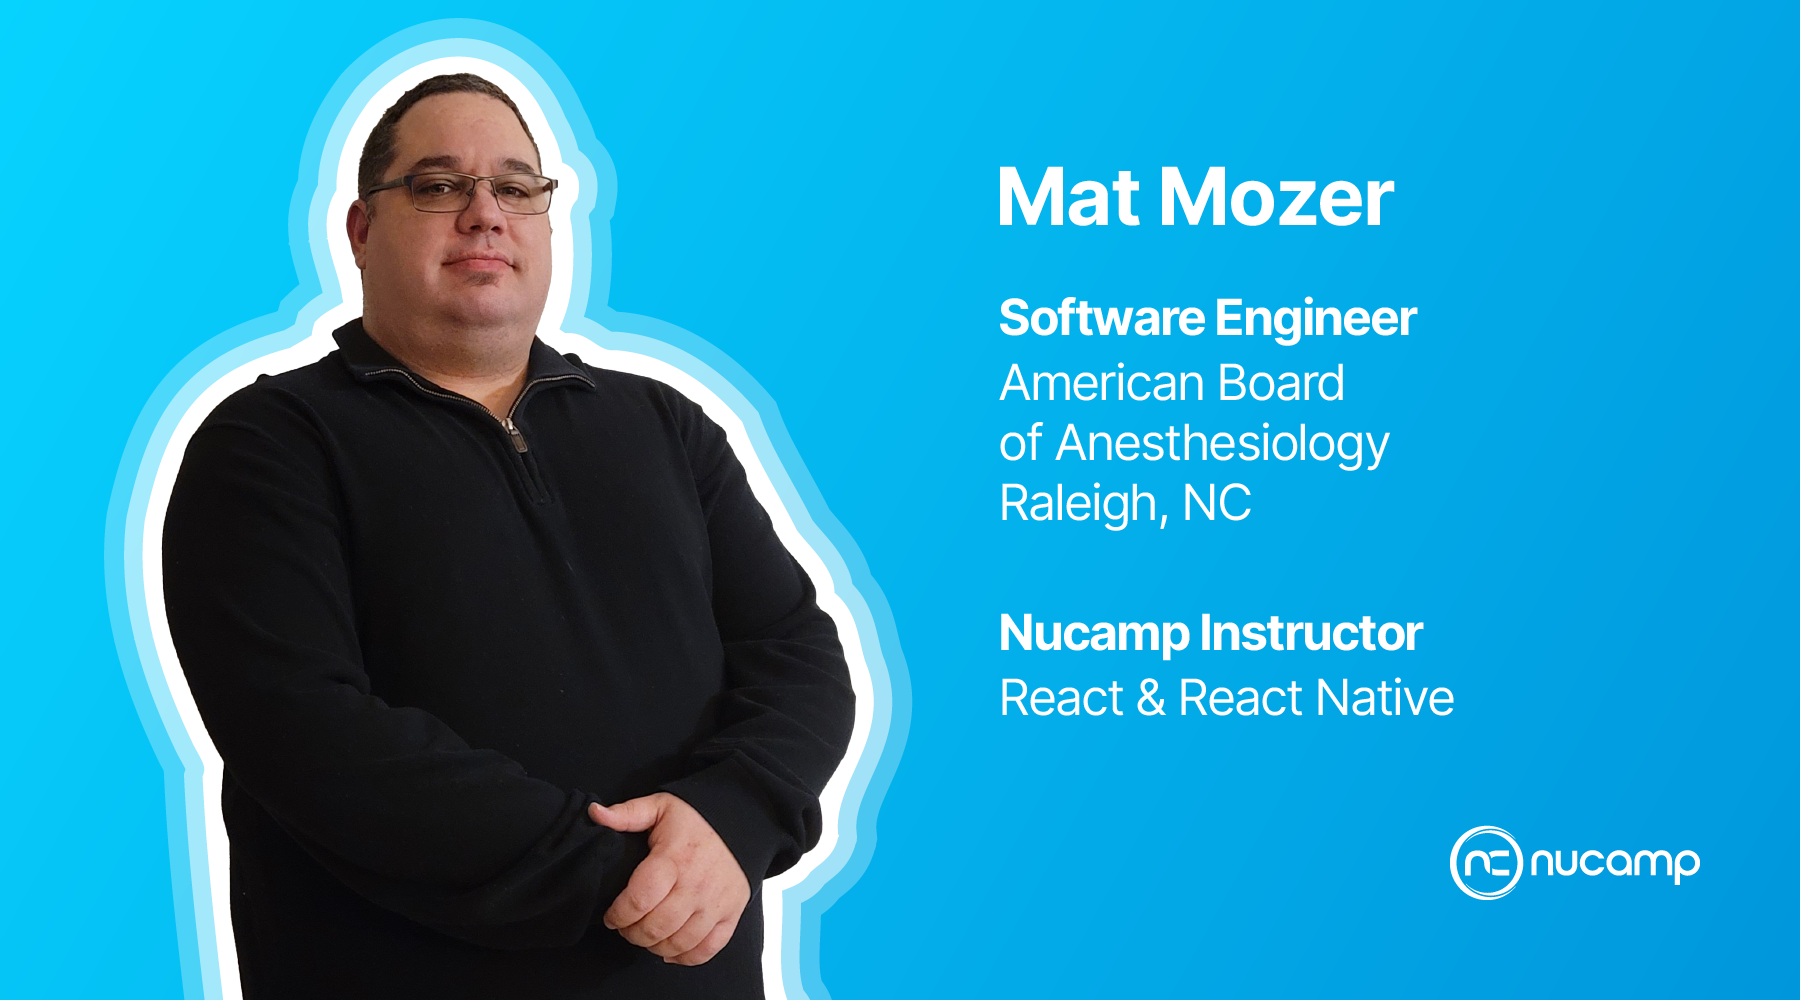 Mat Mozer, Software Engineer and Startup CTO, brings the brains and the heart as a Nucamp Instructor